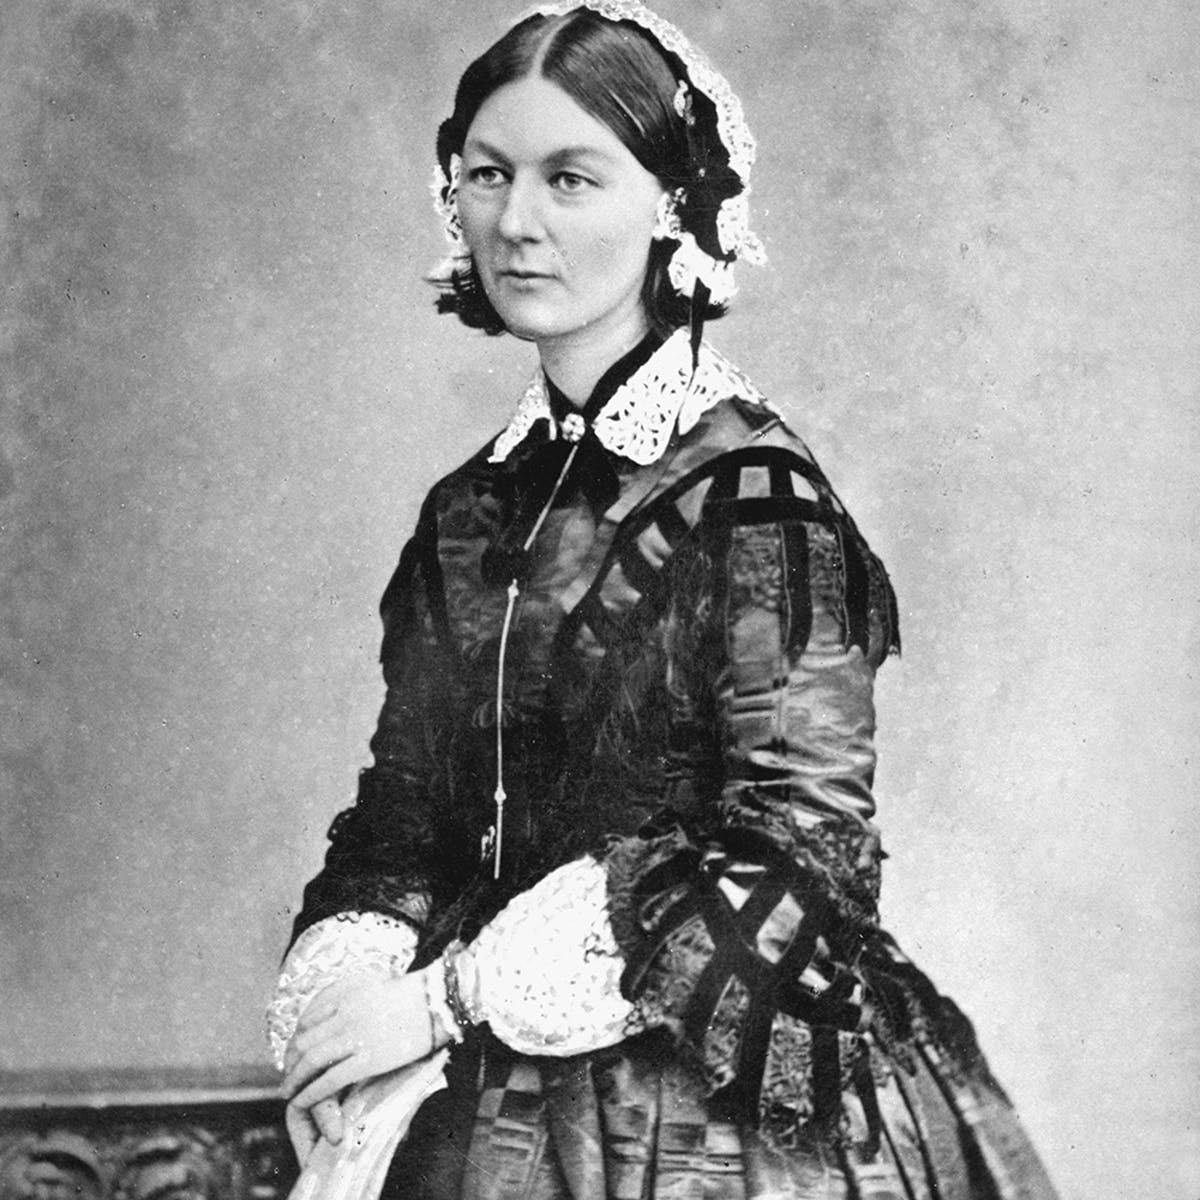 Although trustworthy statistics on crinoline-related fatalities are rare, Florence Nightingale estimated that at least 630 women died from their clothes catching fire in 1863-64.